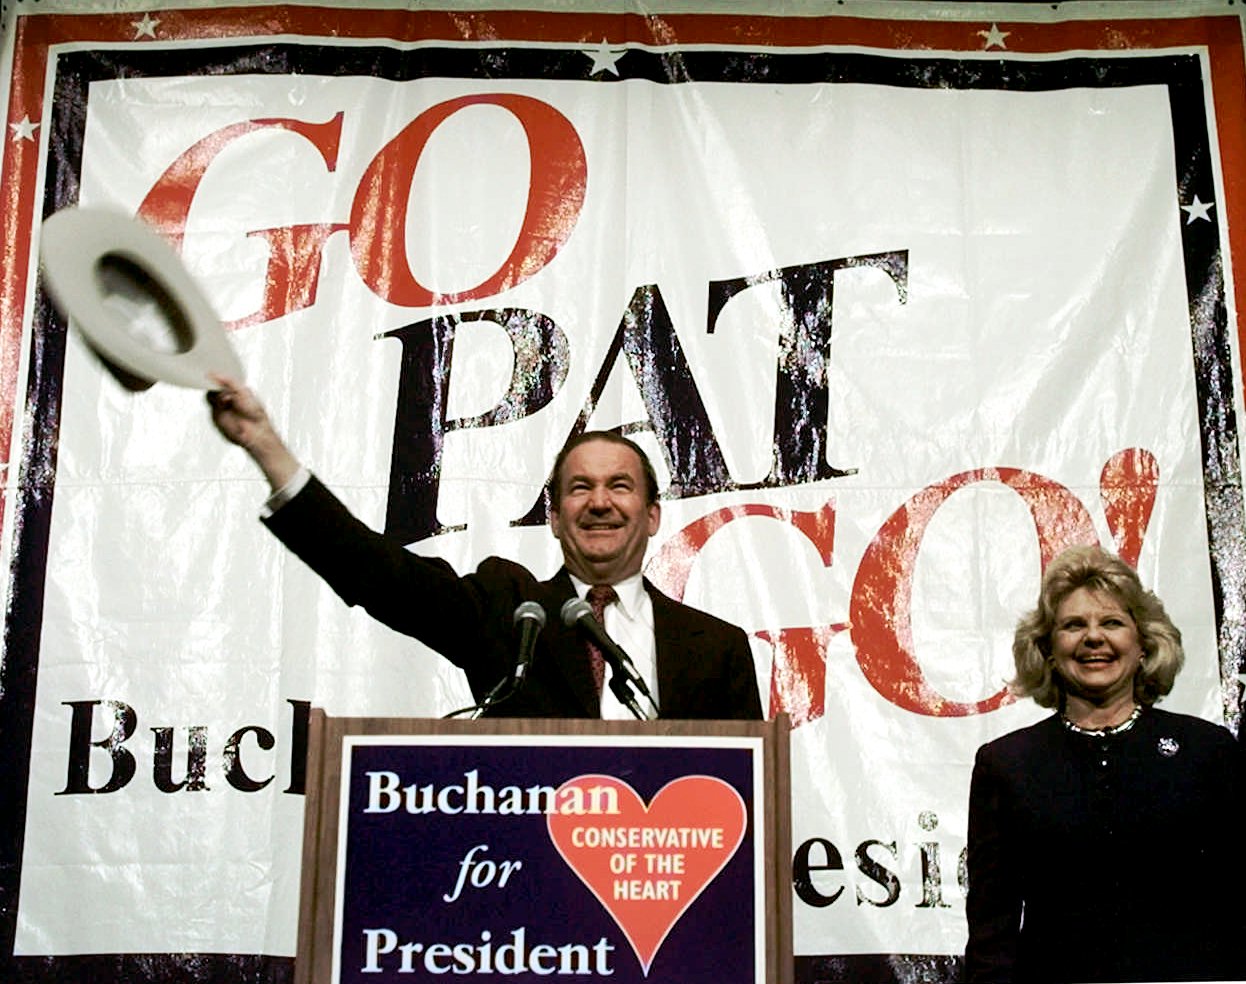 Pat Buchanan and wife Shelley acknowledge the crowd after their introduction at a rally in the George R. Brown Convention Center in Houston, Texas Saturday March 9, 1996. (AP Photo/ Michael S. Green)